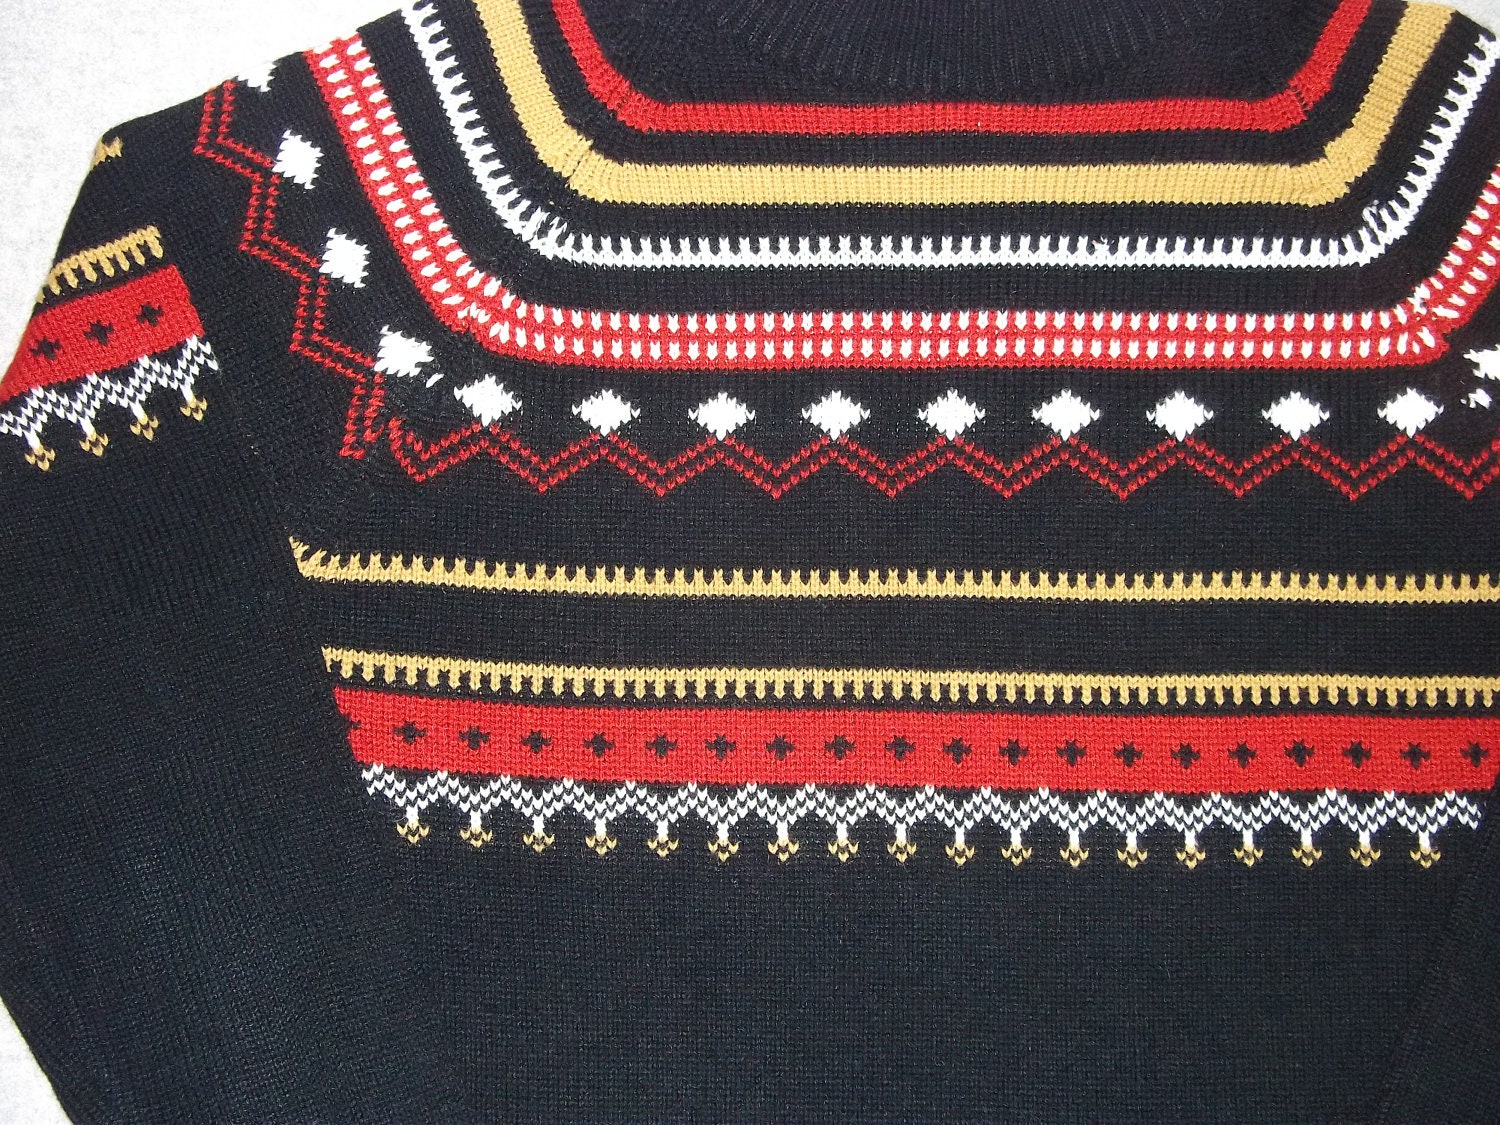 70s 80s Nordic Ski Skiing Hipster Aztec Vintage Sweater Tacky Gaudy ...